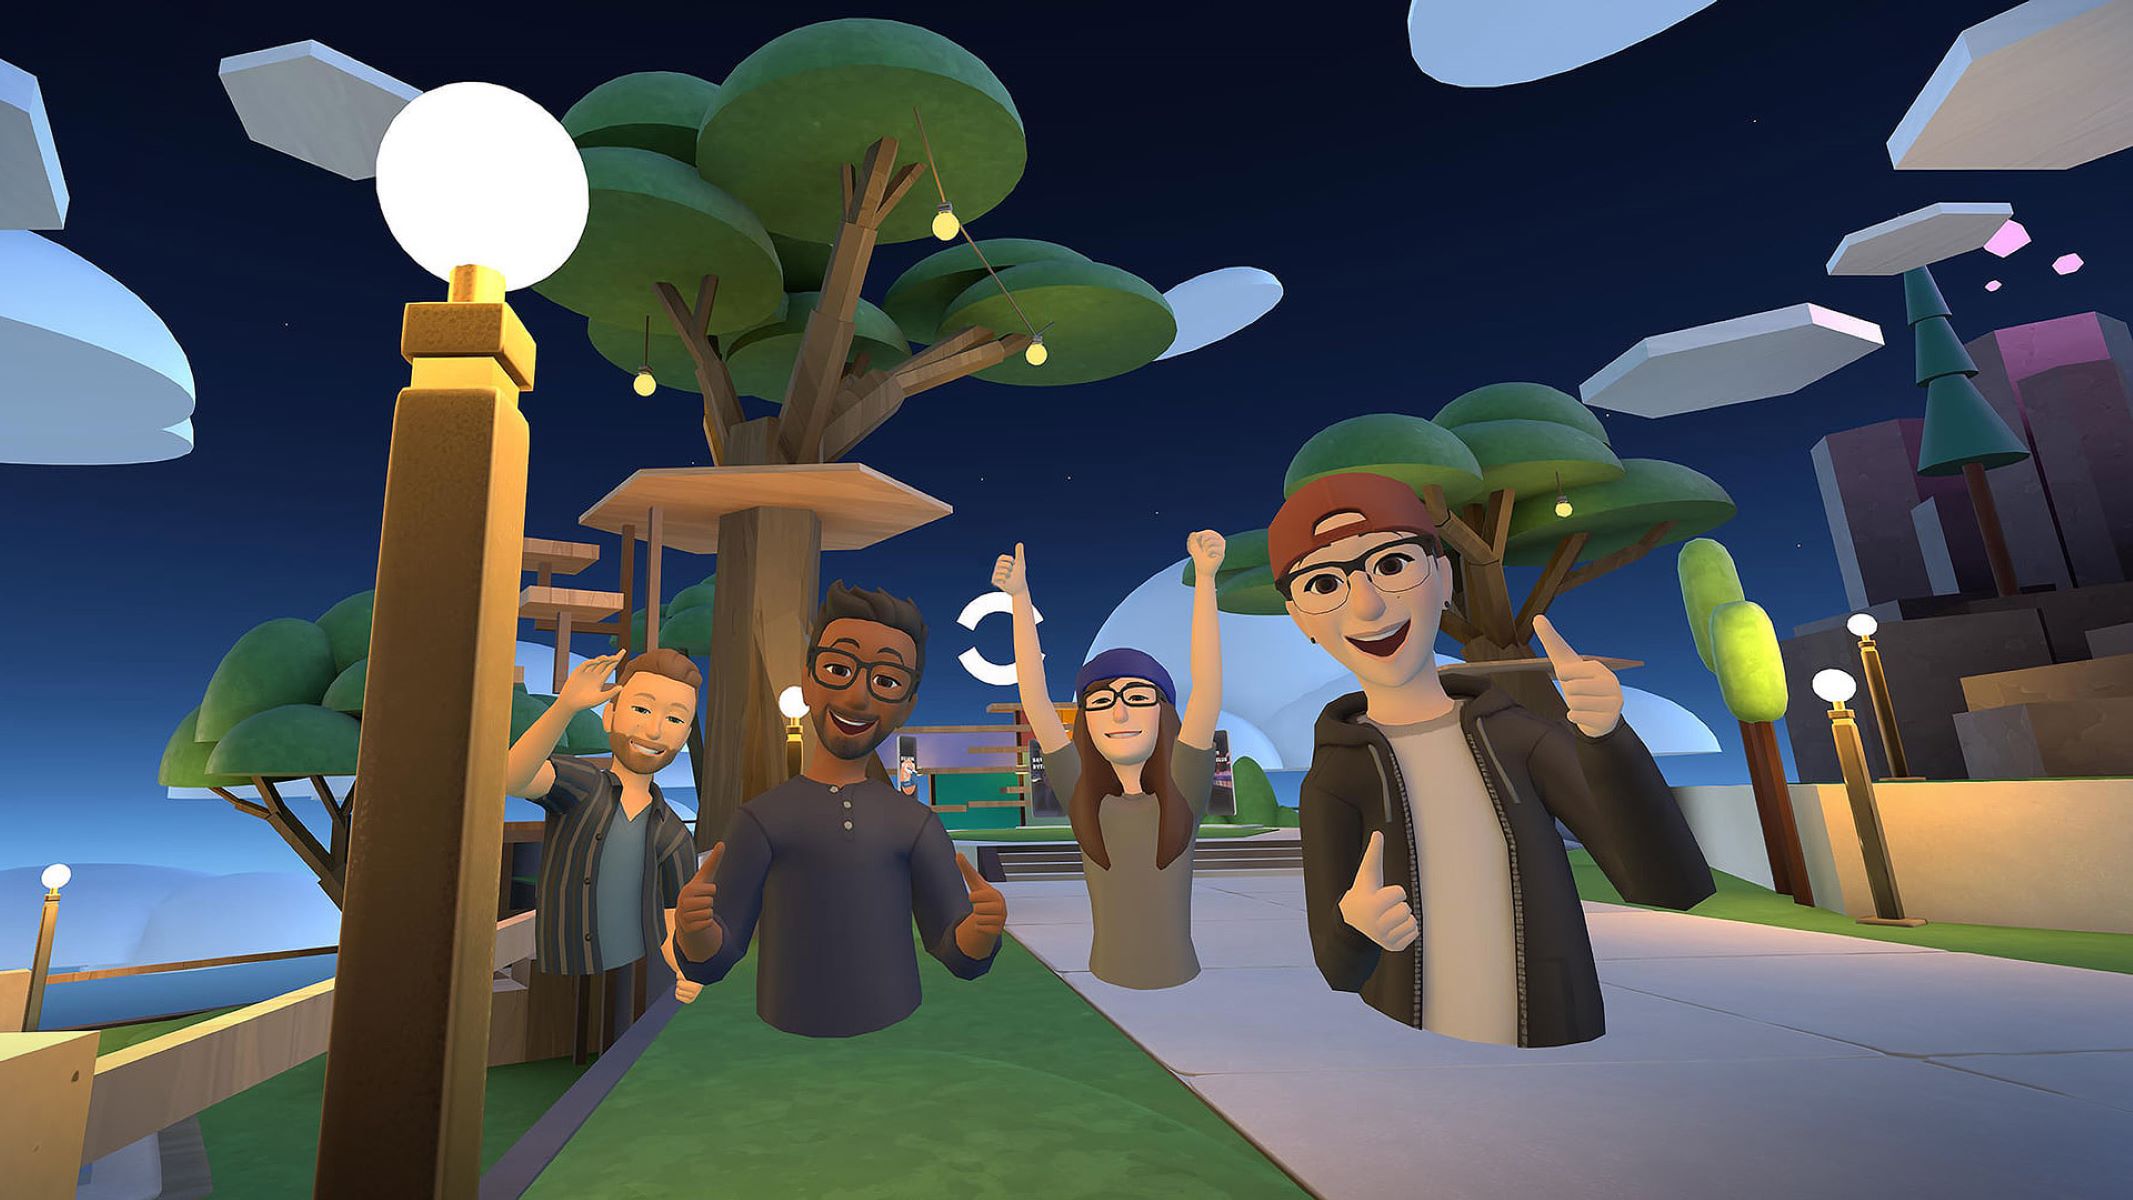 Meta’s Horizon Worlds Expands To Web And Mobile: A New Era For VR Social App